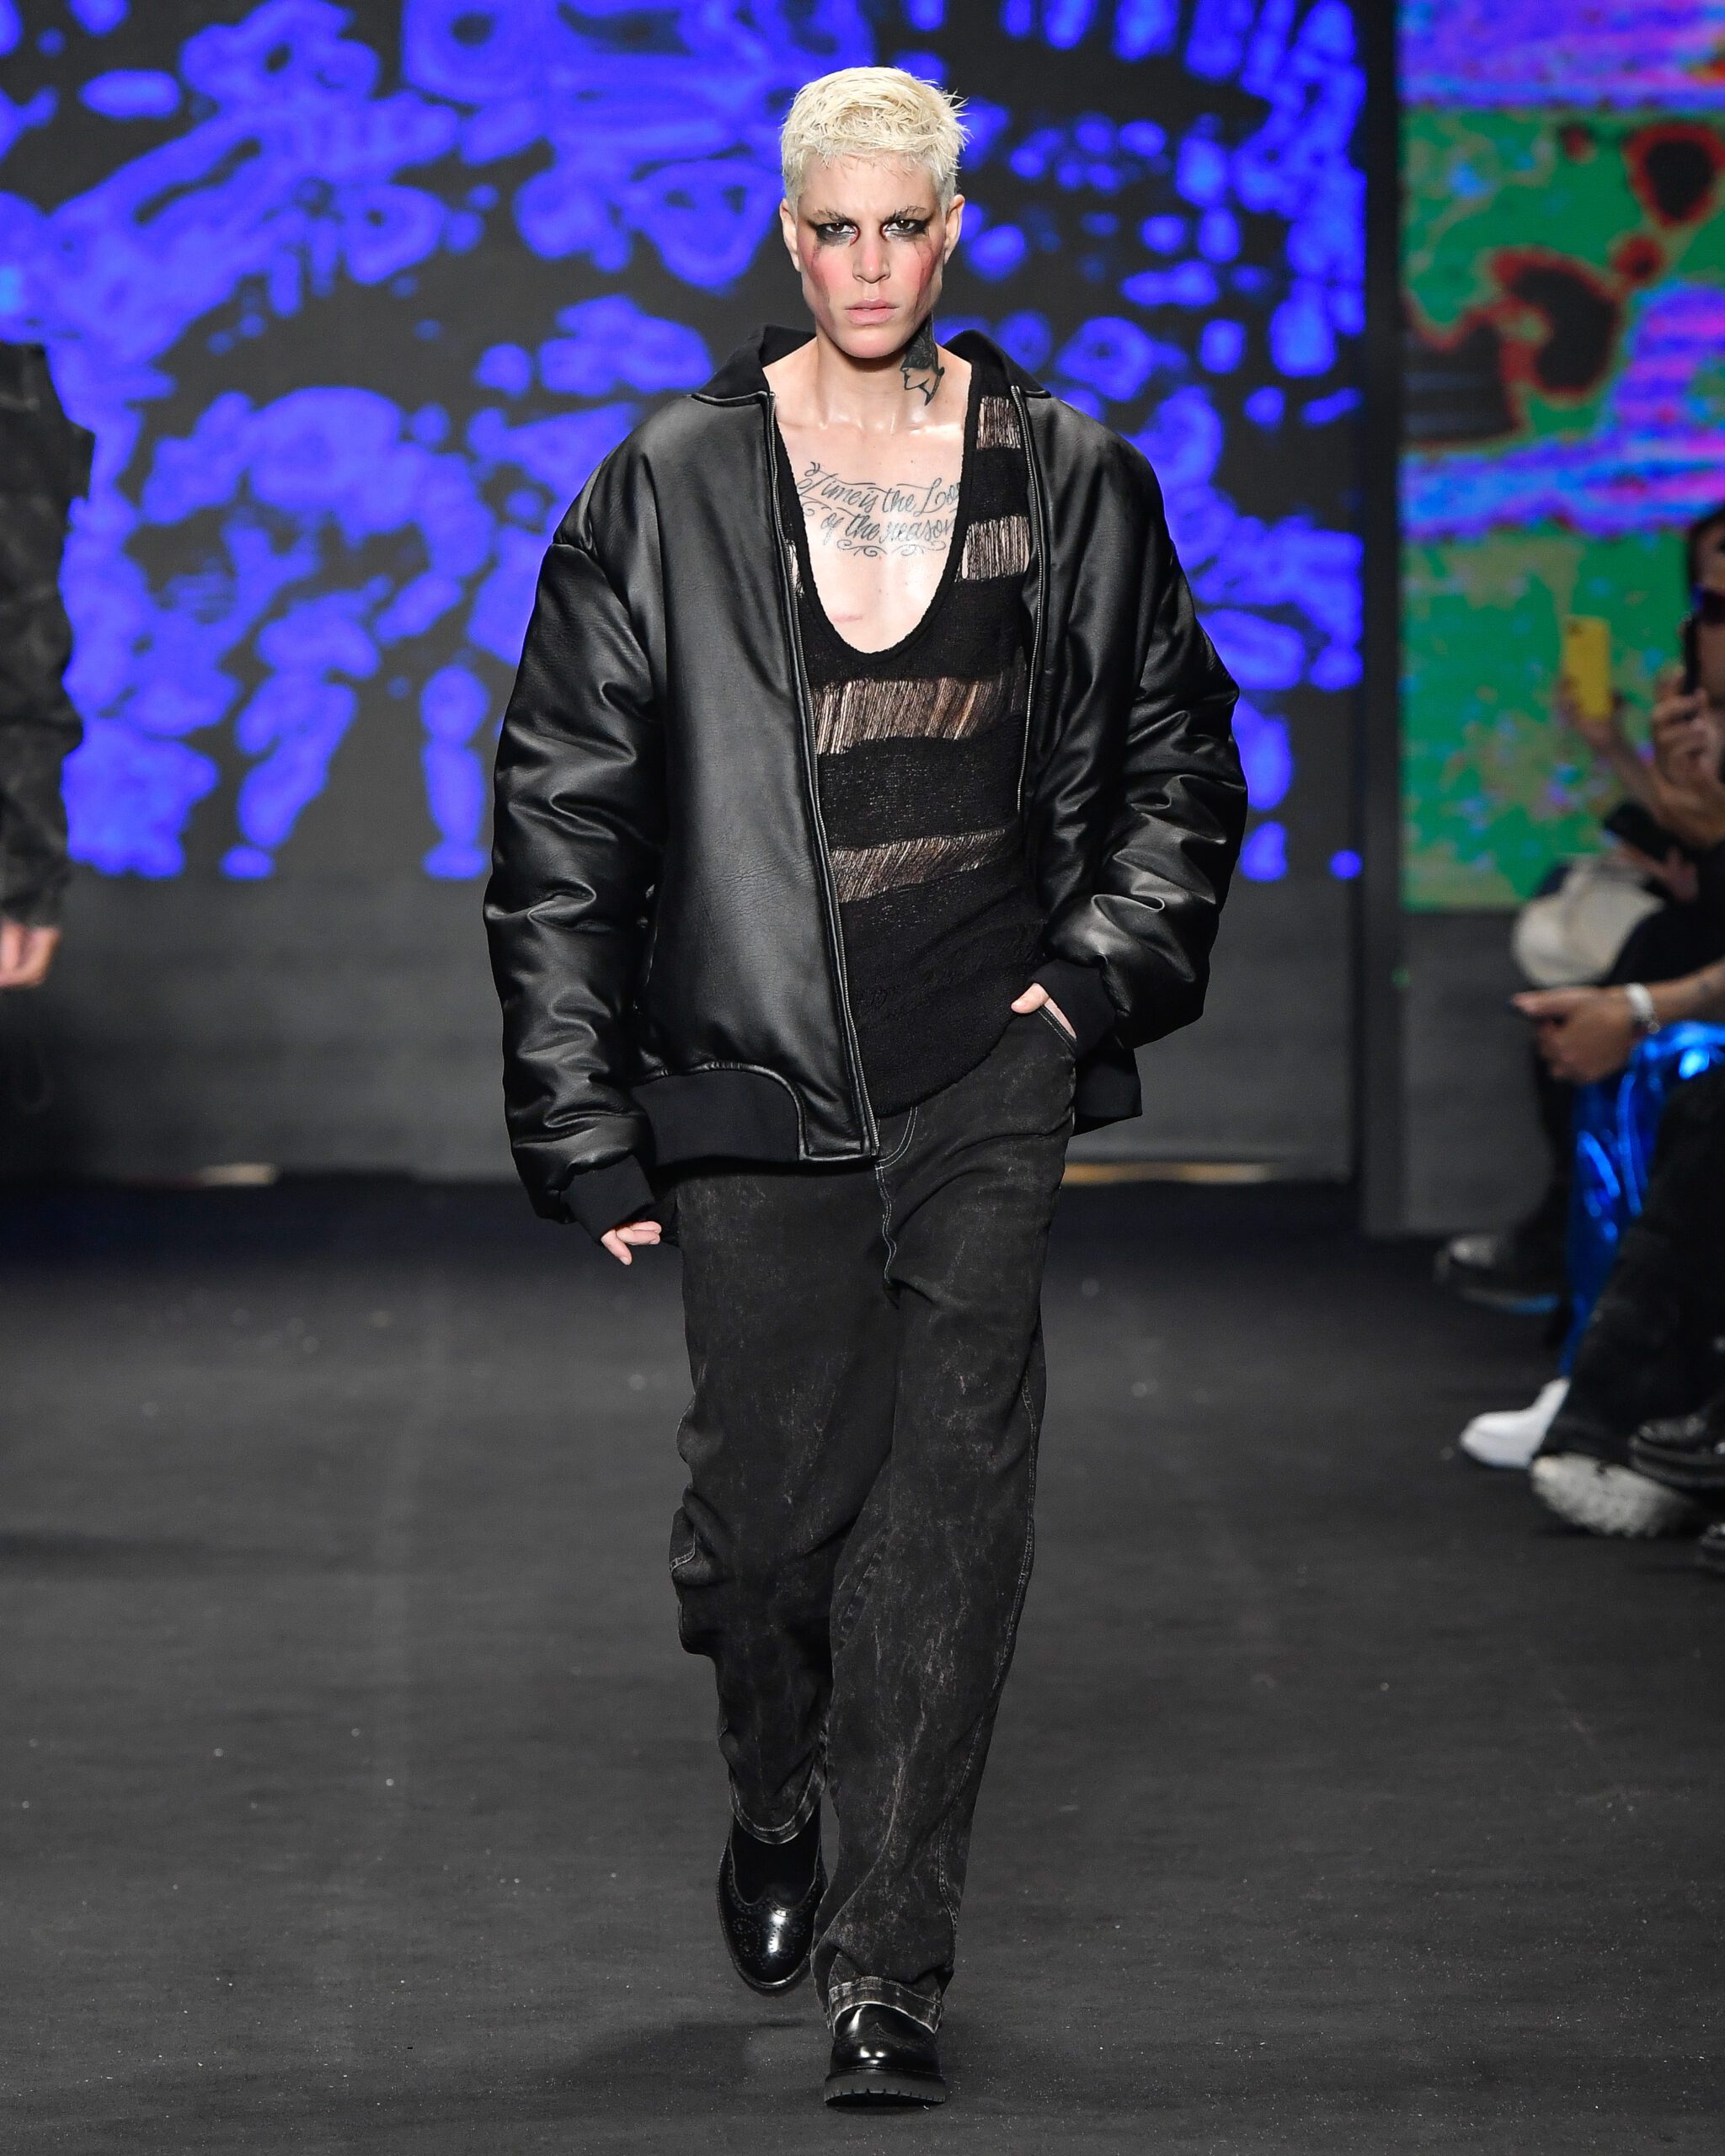 Another Place

SPFW N54

Ze Takahashi / @agfotosite